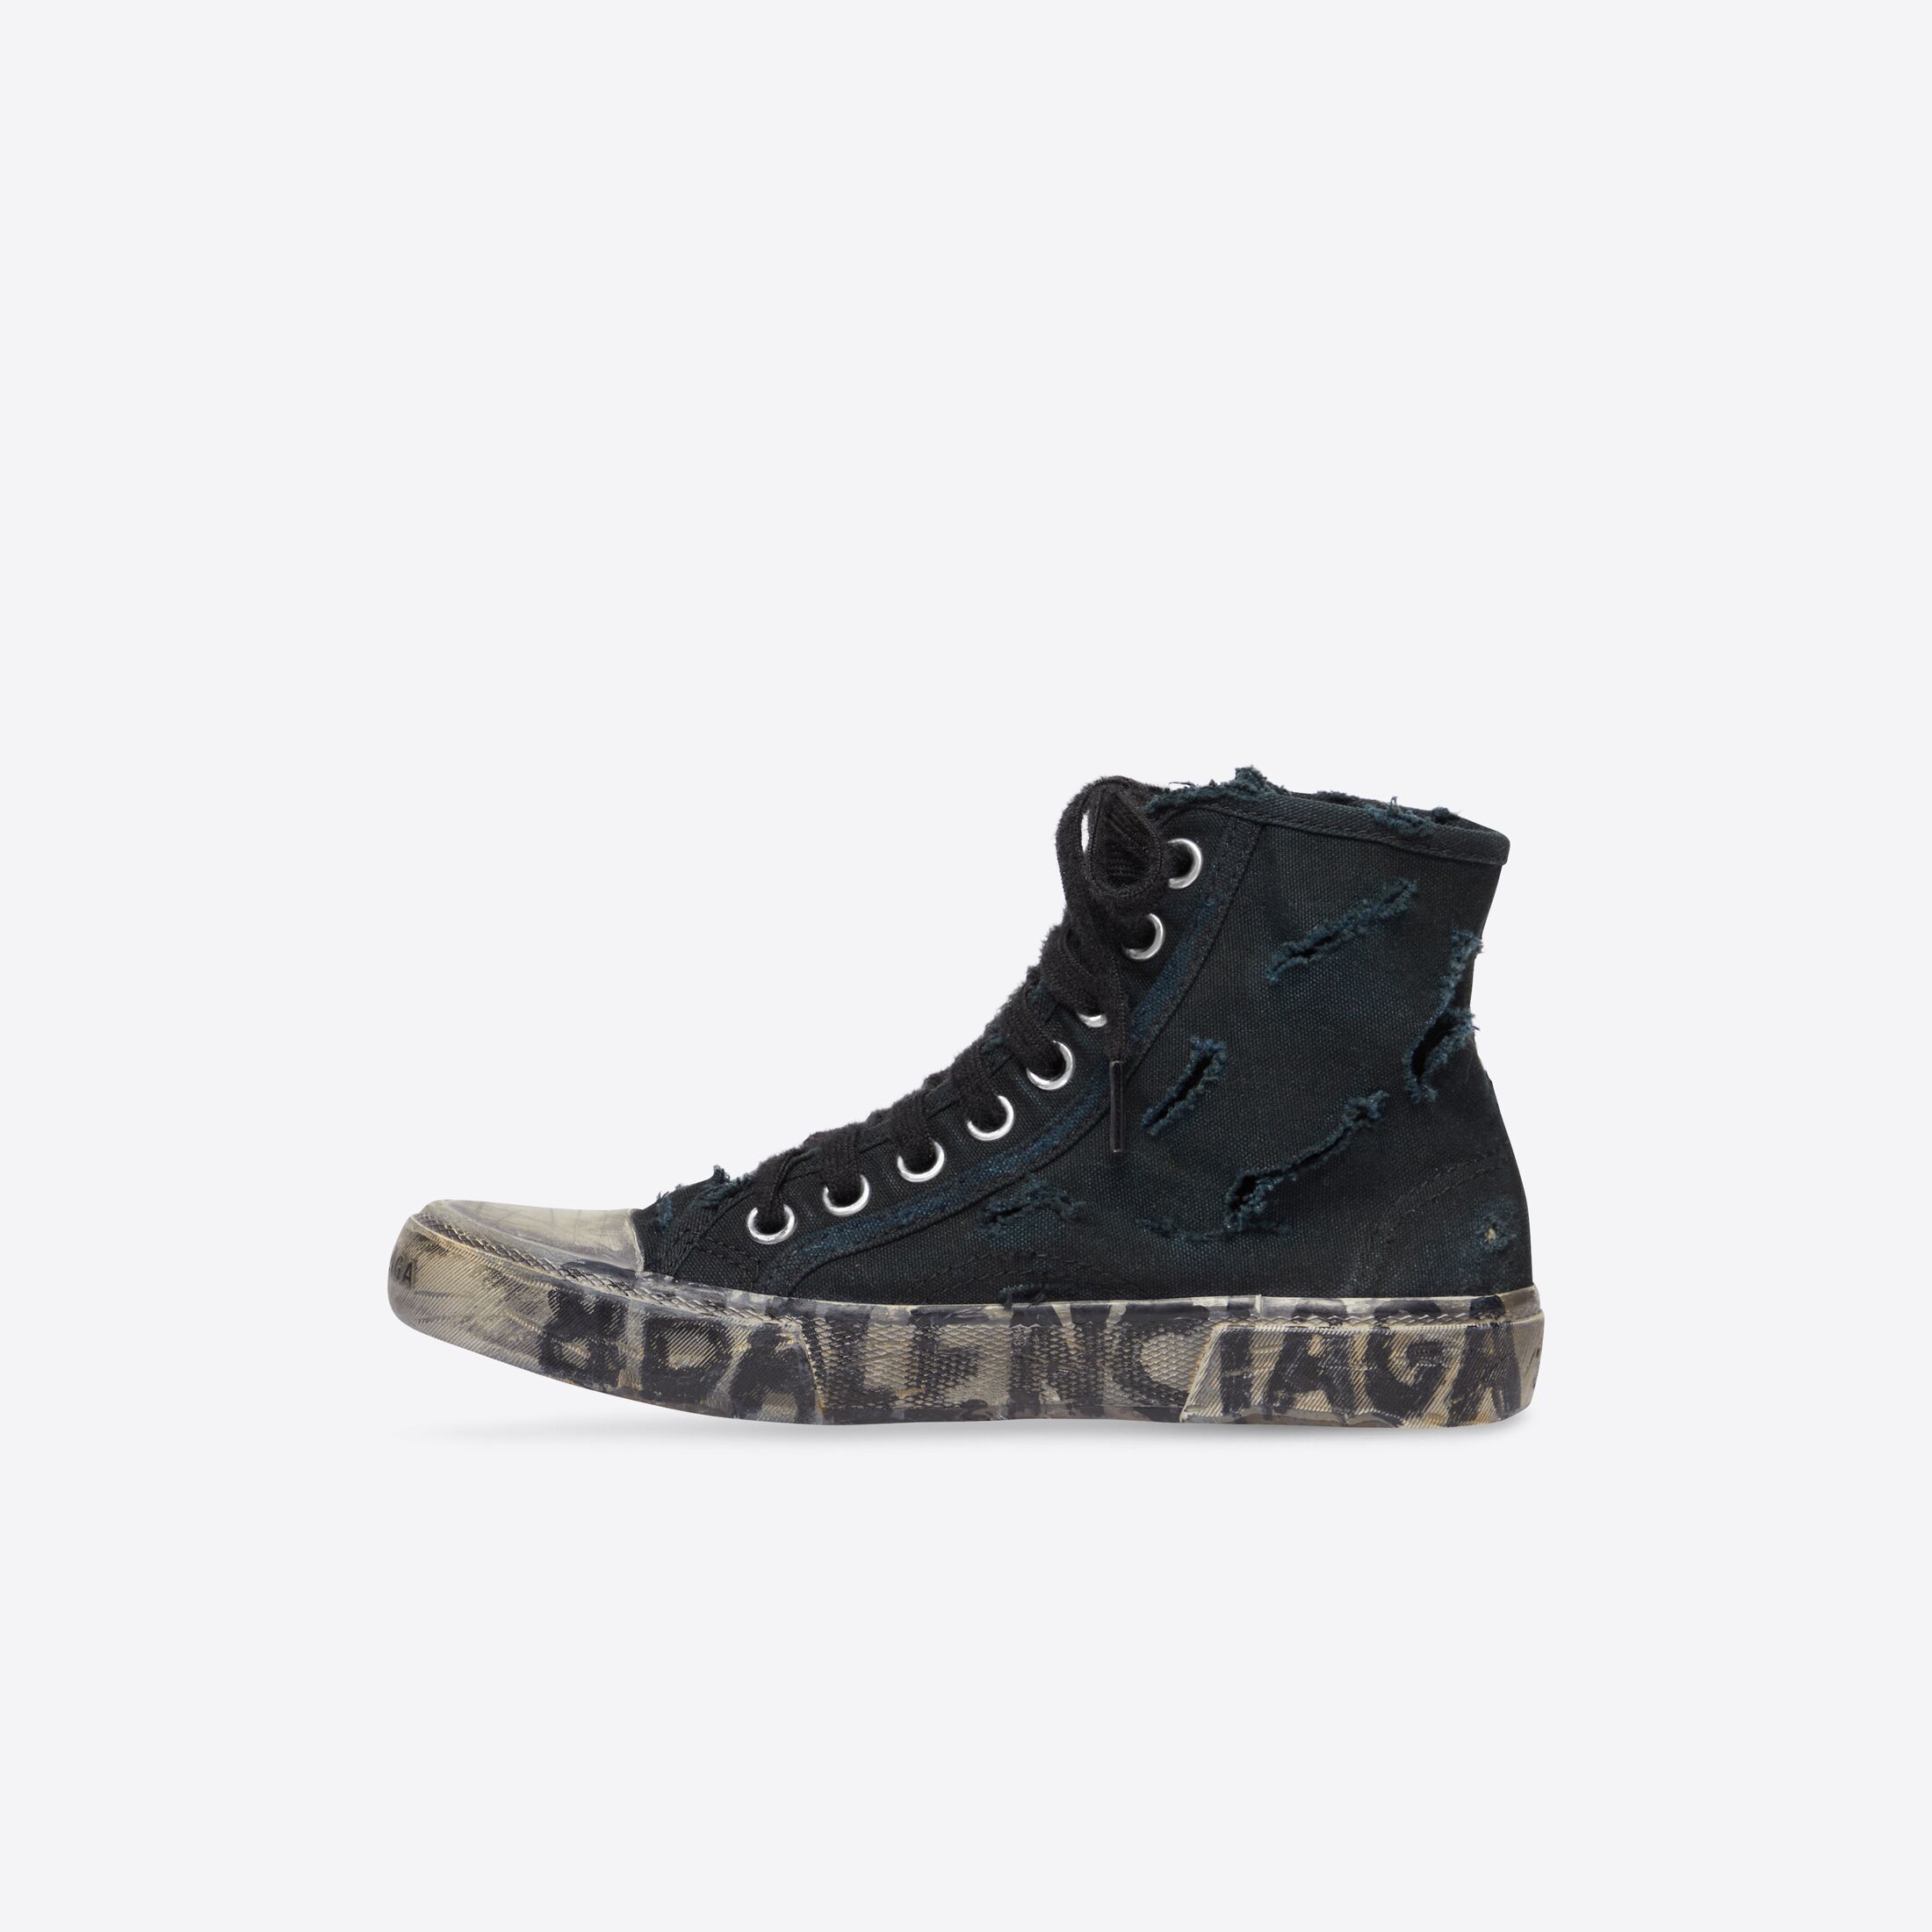 Indrømme forum Jep Balenciaga is Selling These Destroyed Sneakers For Over HKD 14,000